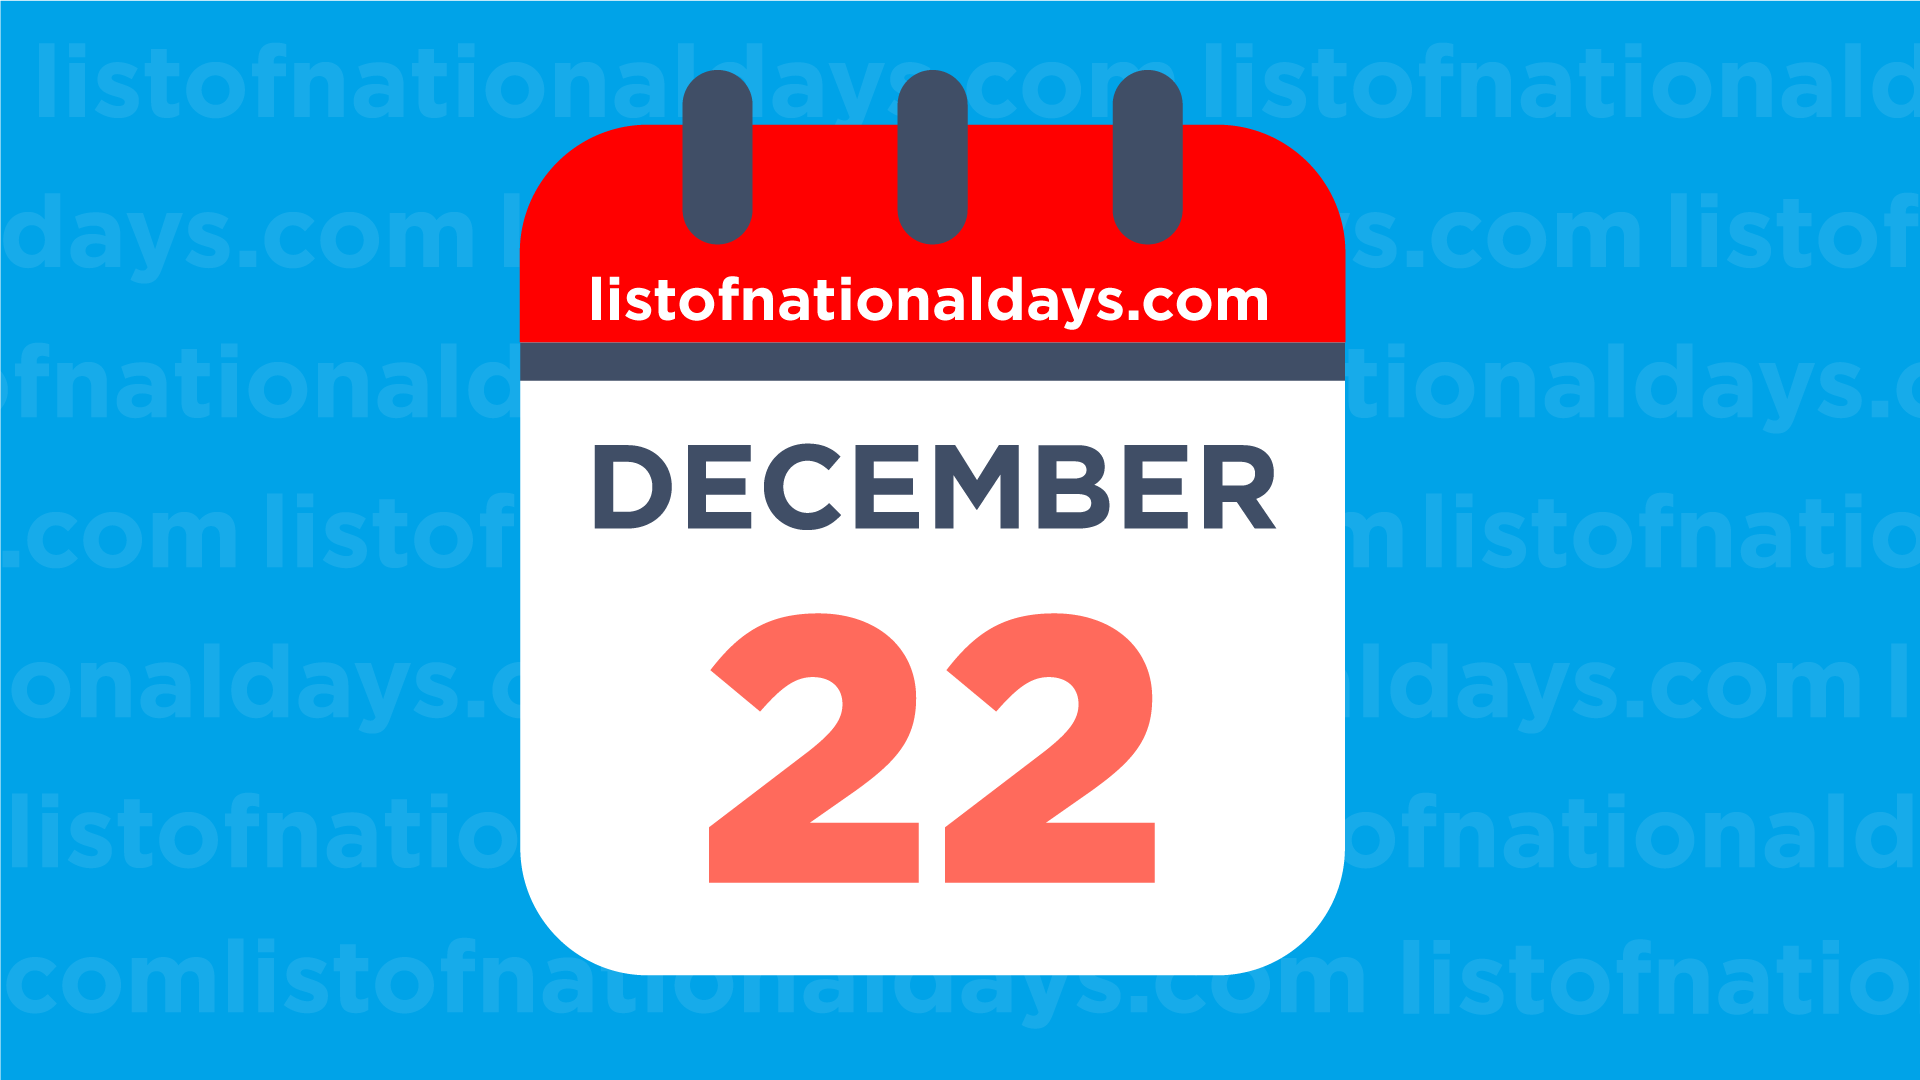 DECEMBER 22ND: National Holidays,Observances & Famous Birthdays